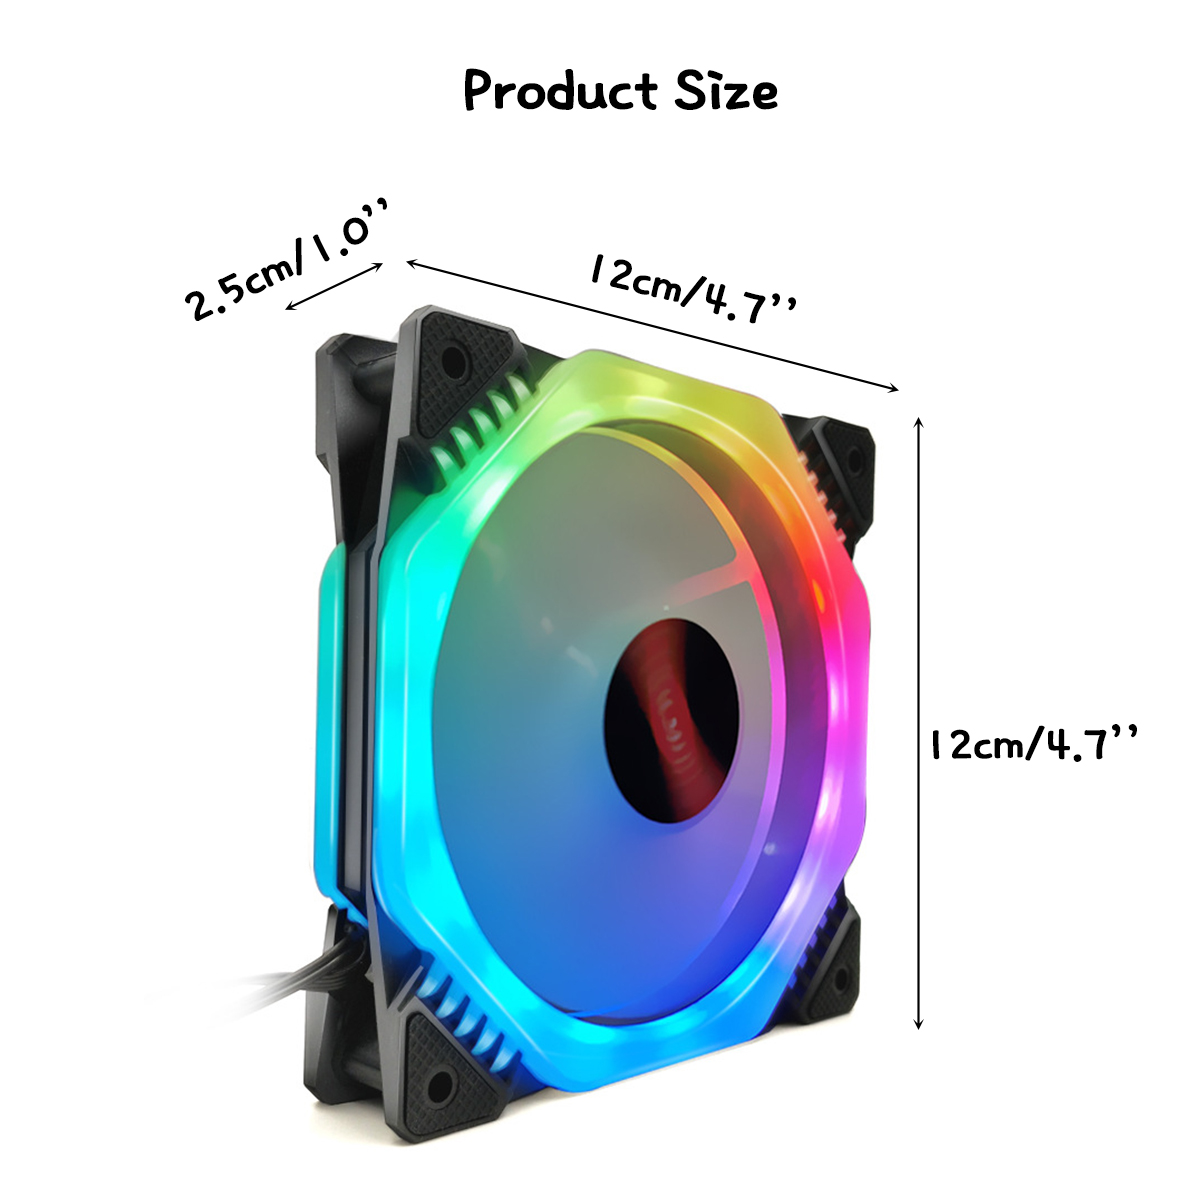 C47346-RGB-PC-Cooling-Fan-1400-RPM-42W-RGB-Symphony-cooling-fan-With-the-Remote-Control-1707240-4